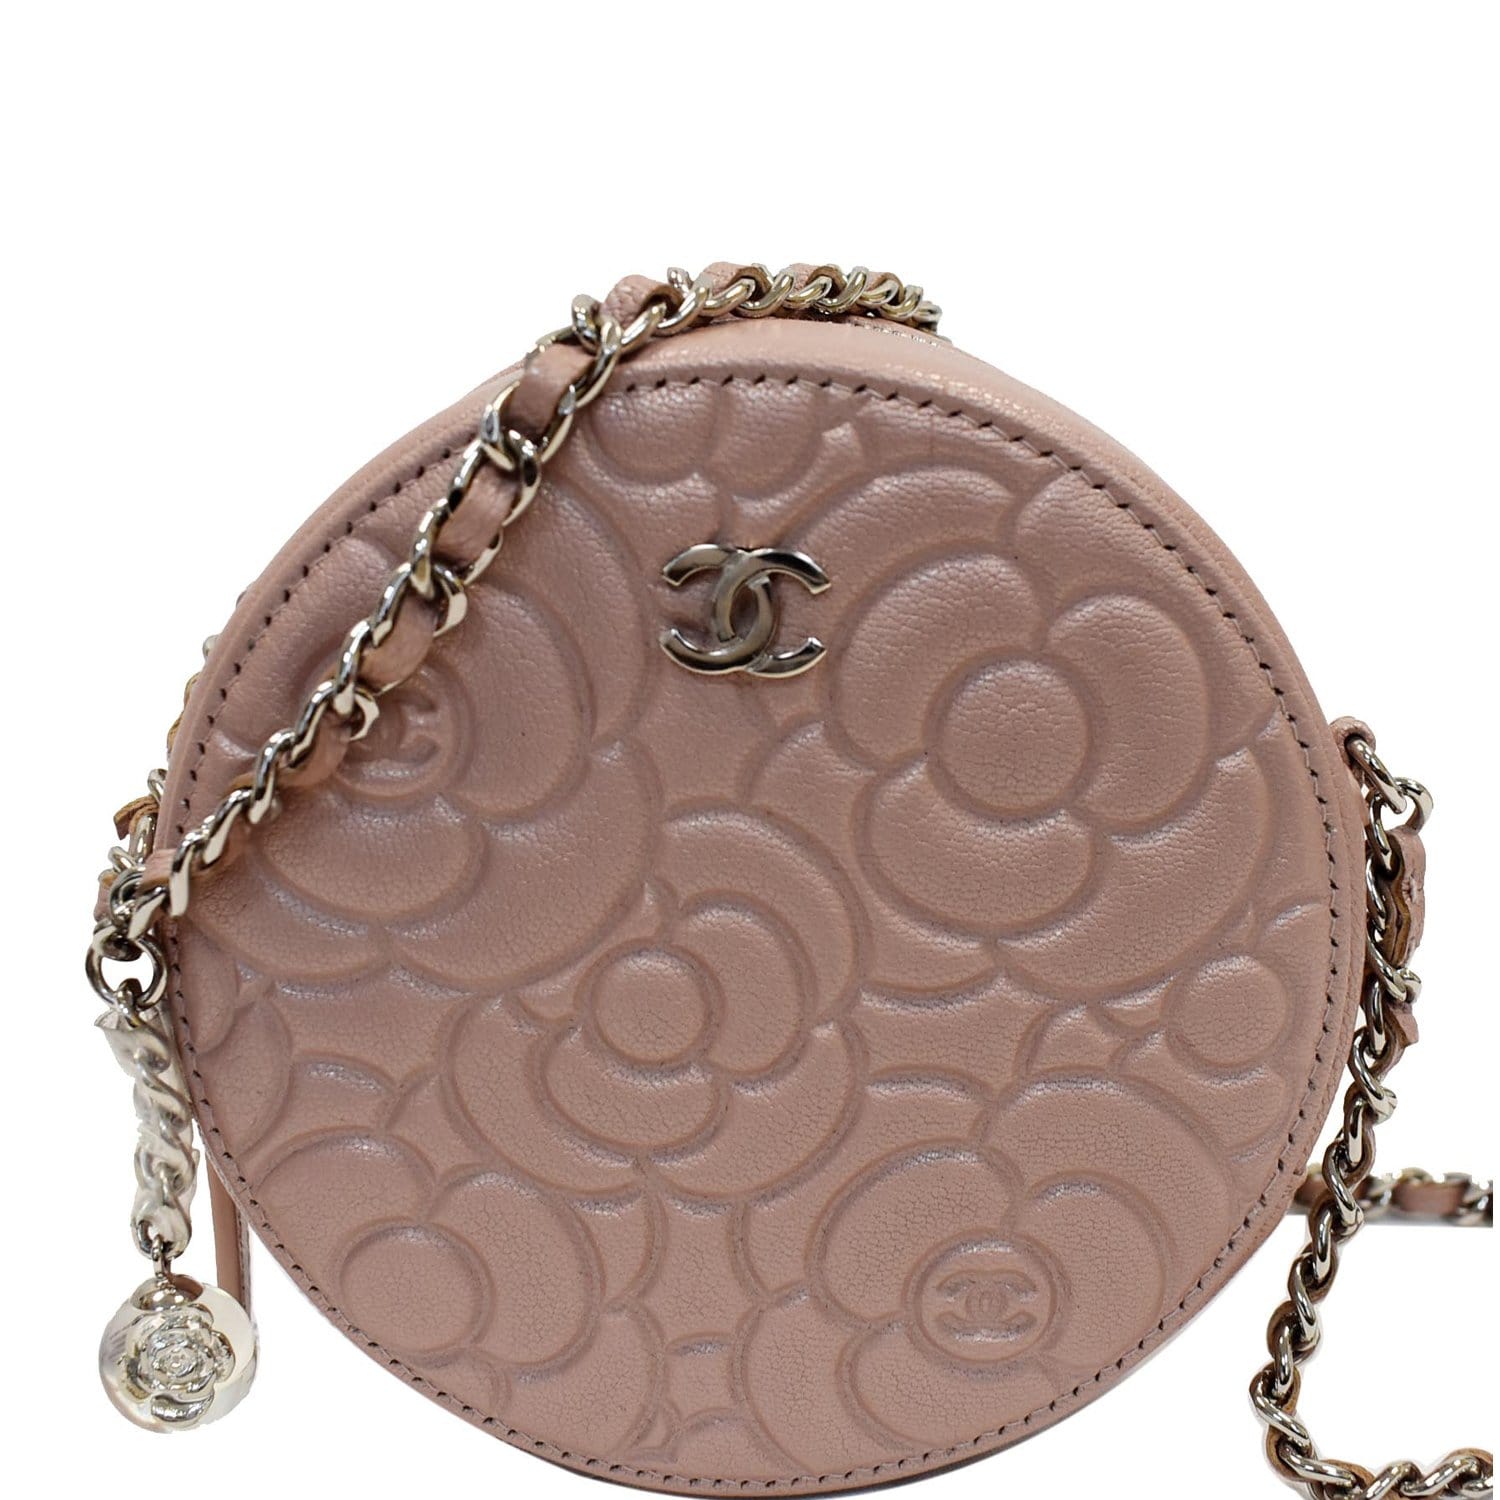 Gabrielle leather crossbody bag Chanel Pink in Leather - 34795679